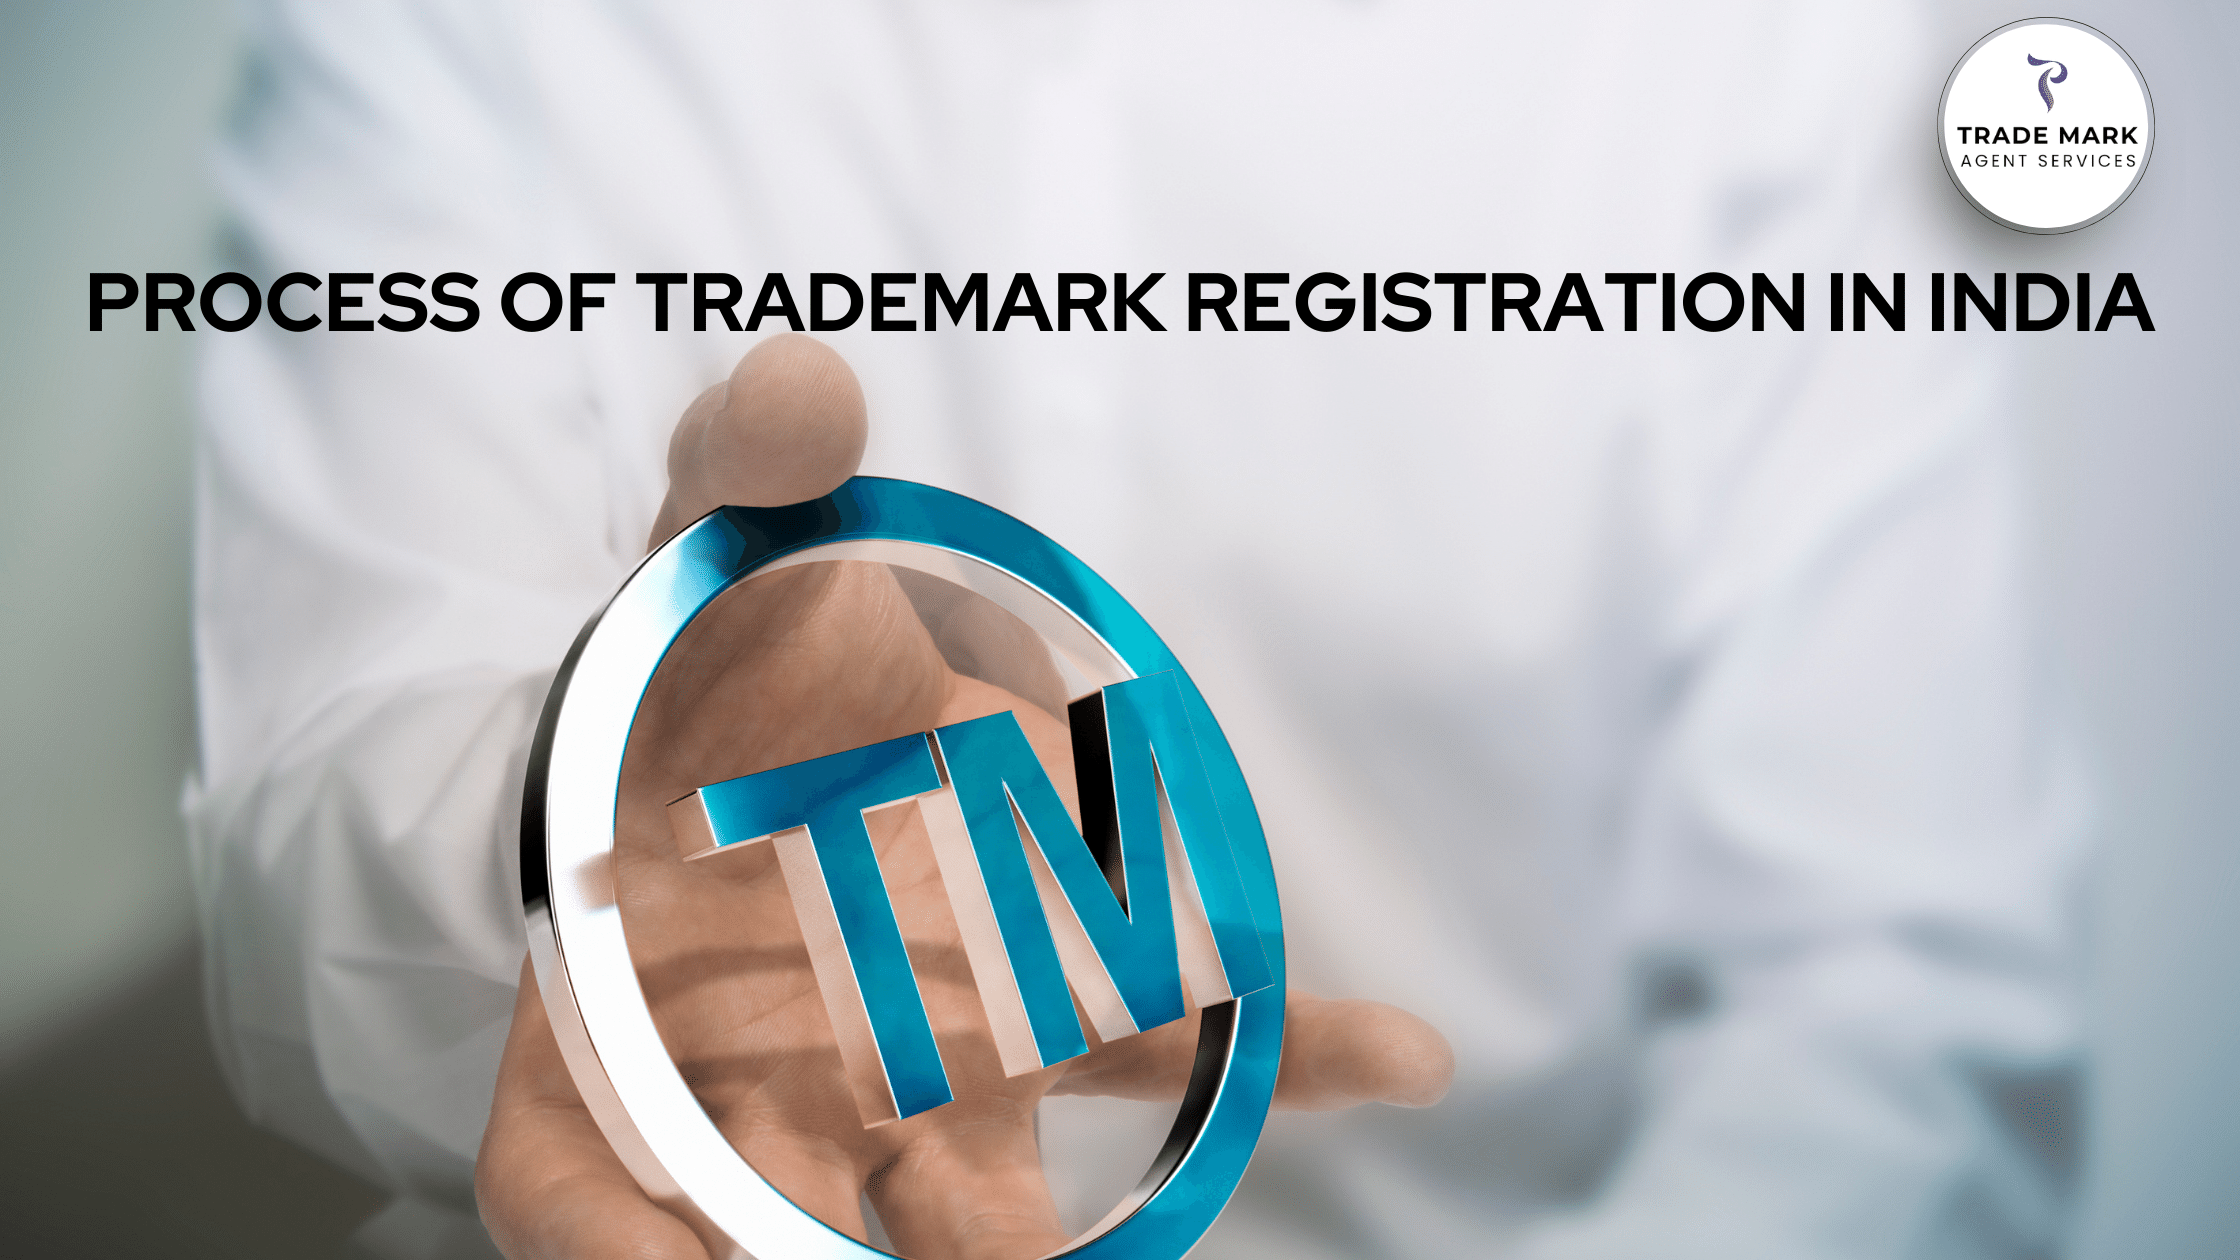 PROCESS OF TRADEMARK REGISTRATION IN INDIA